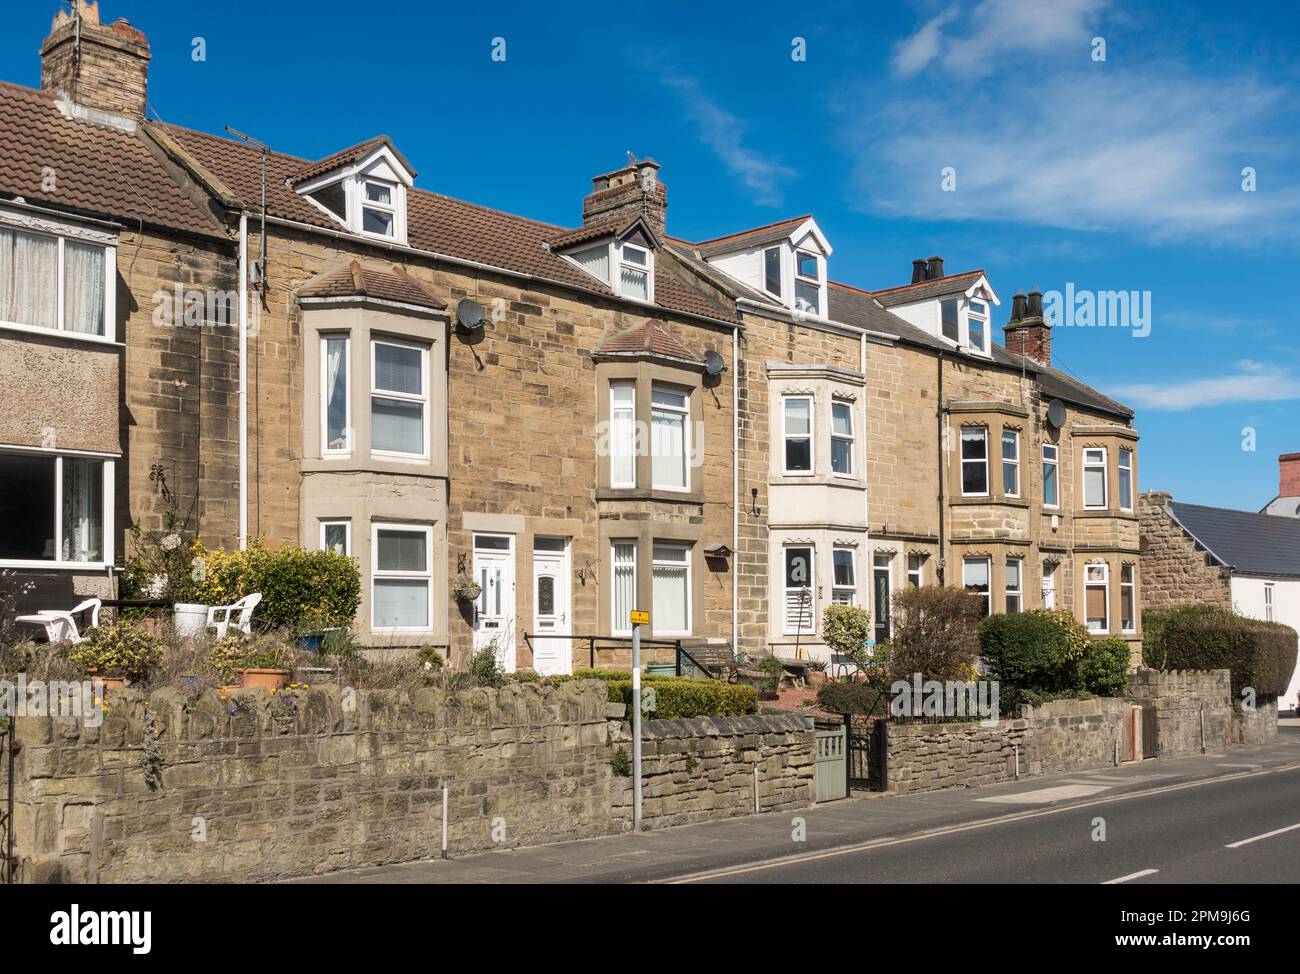 A row of stone built terraced houses in Newbiggin by the Sea, Northumberland, England, UK Stock Photo